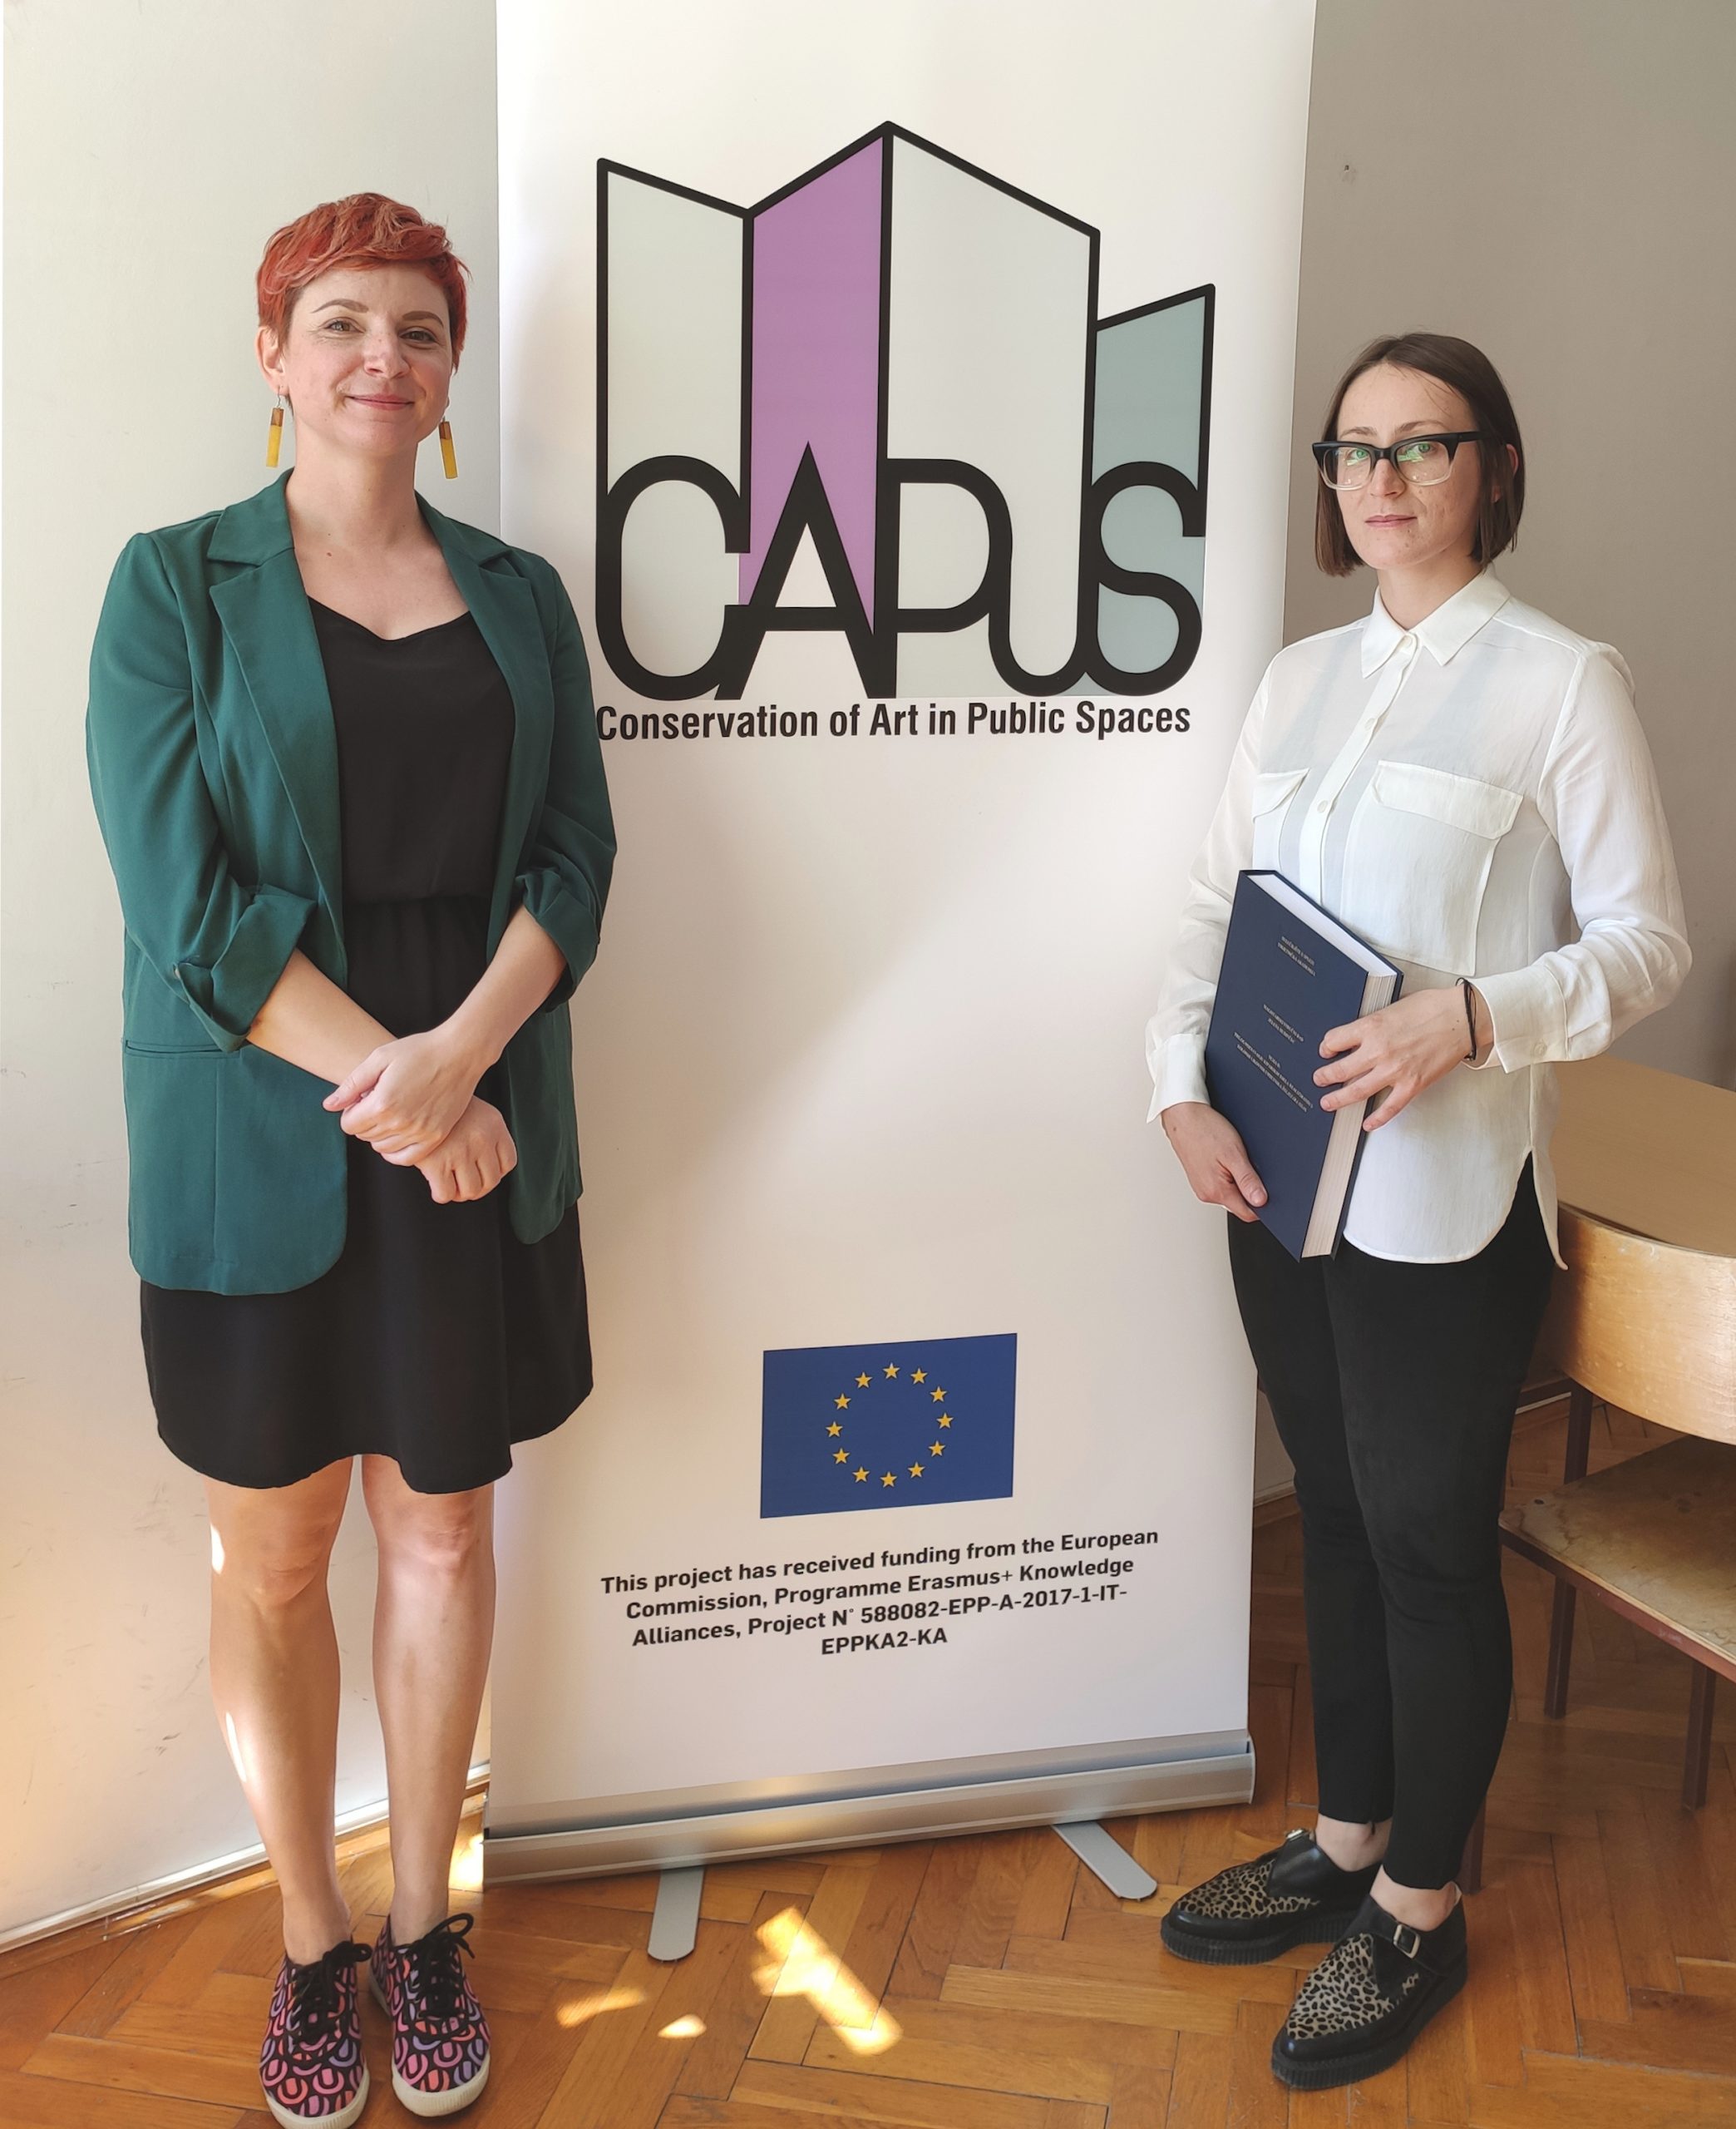 Jelena Hudinčec (University of Split – Arts Academy) defends MA theses related to the CAPuS project